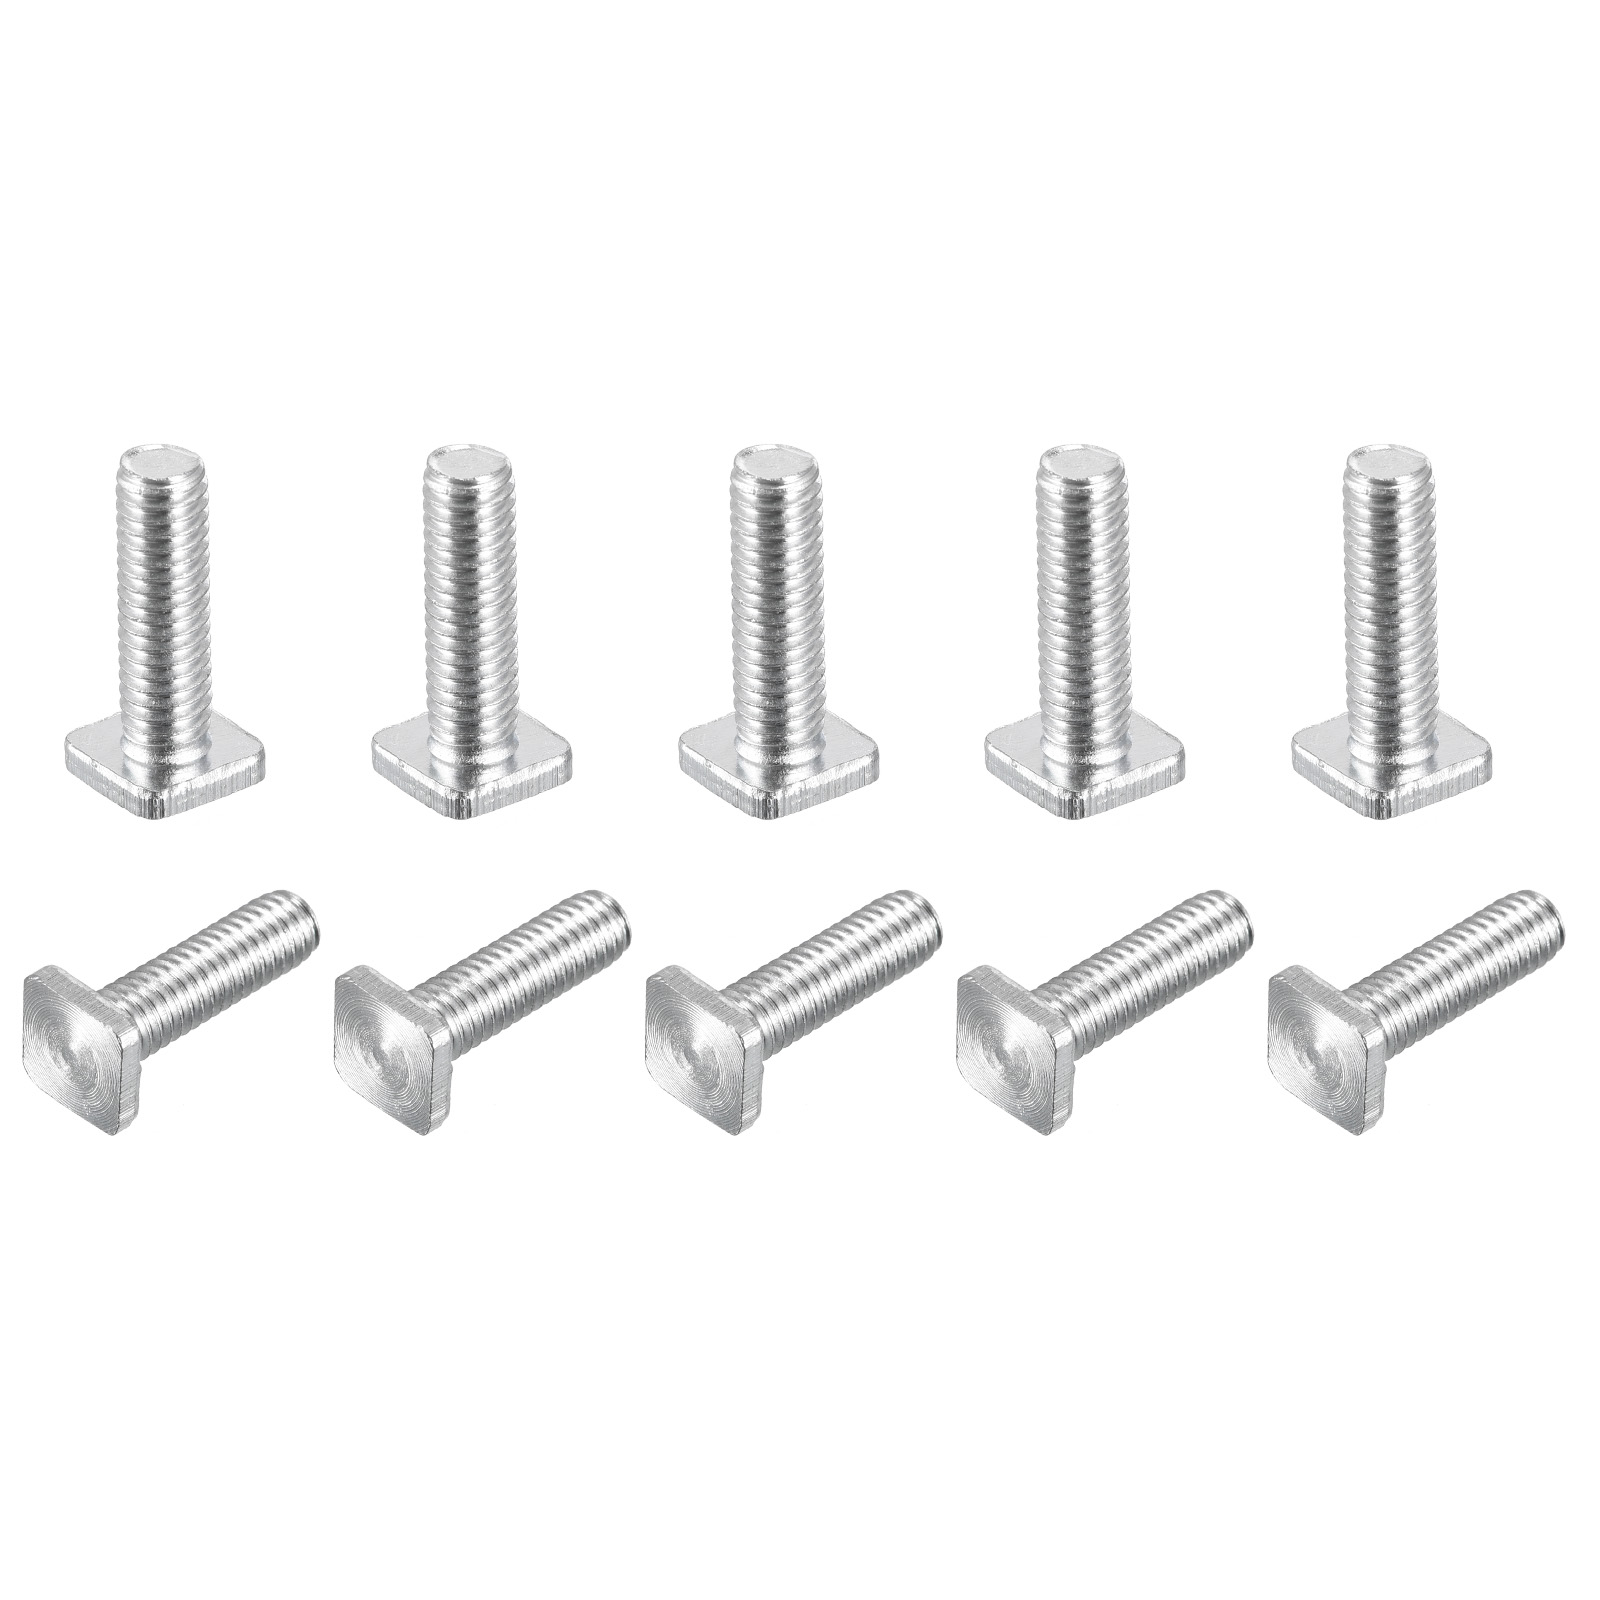 Square Head Bolt, 10 Pack M6x20mm Carbon Steel Grade 4.8 Square Screws - image 1 of 5